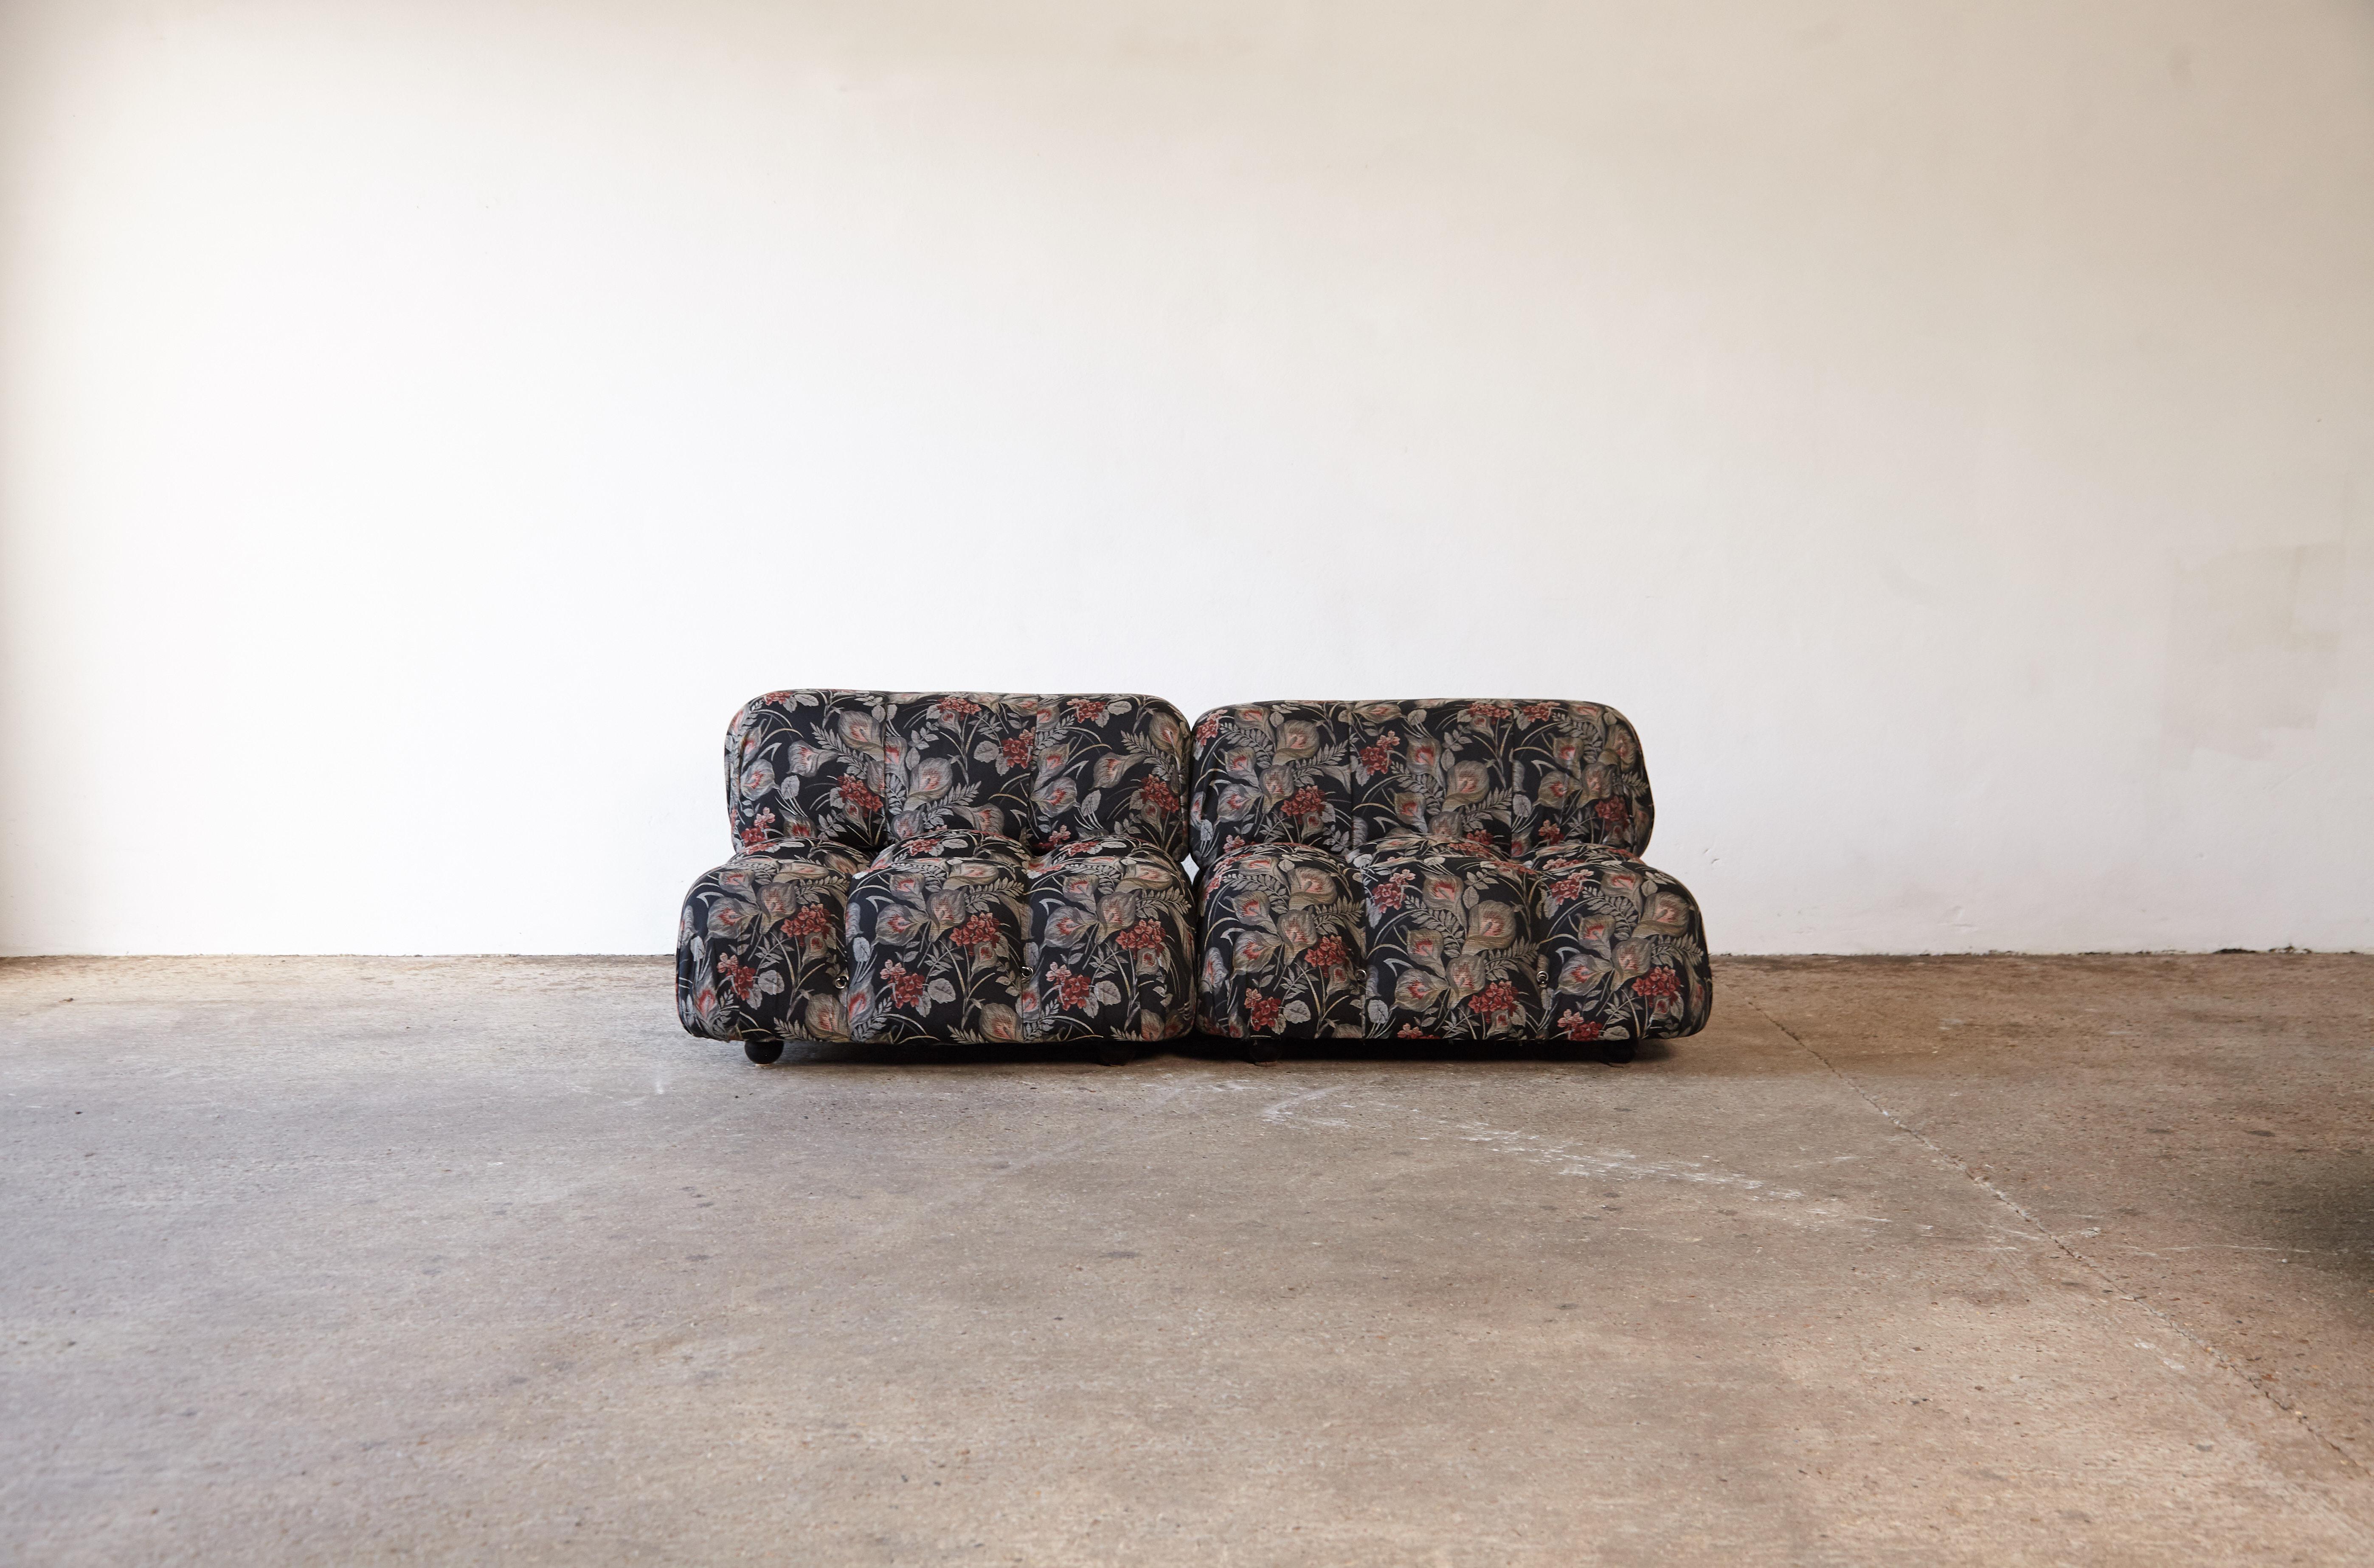 An original and very comfortable Mario Bellini Camaleonda modular sofa, made by B&B Italia, Italy, 1970s. Three large seating elements with back rests. Original floral fabric - no tears or damage. All parts are interchangeable. We can also assist